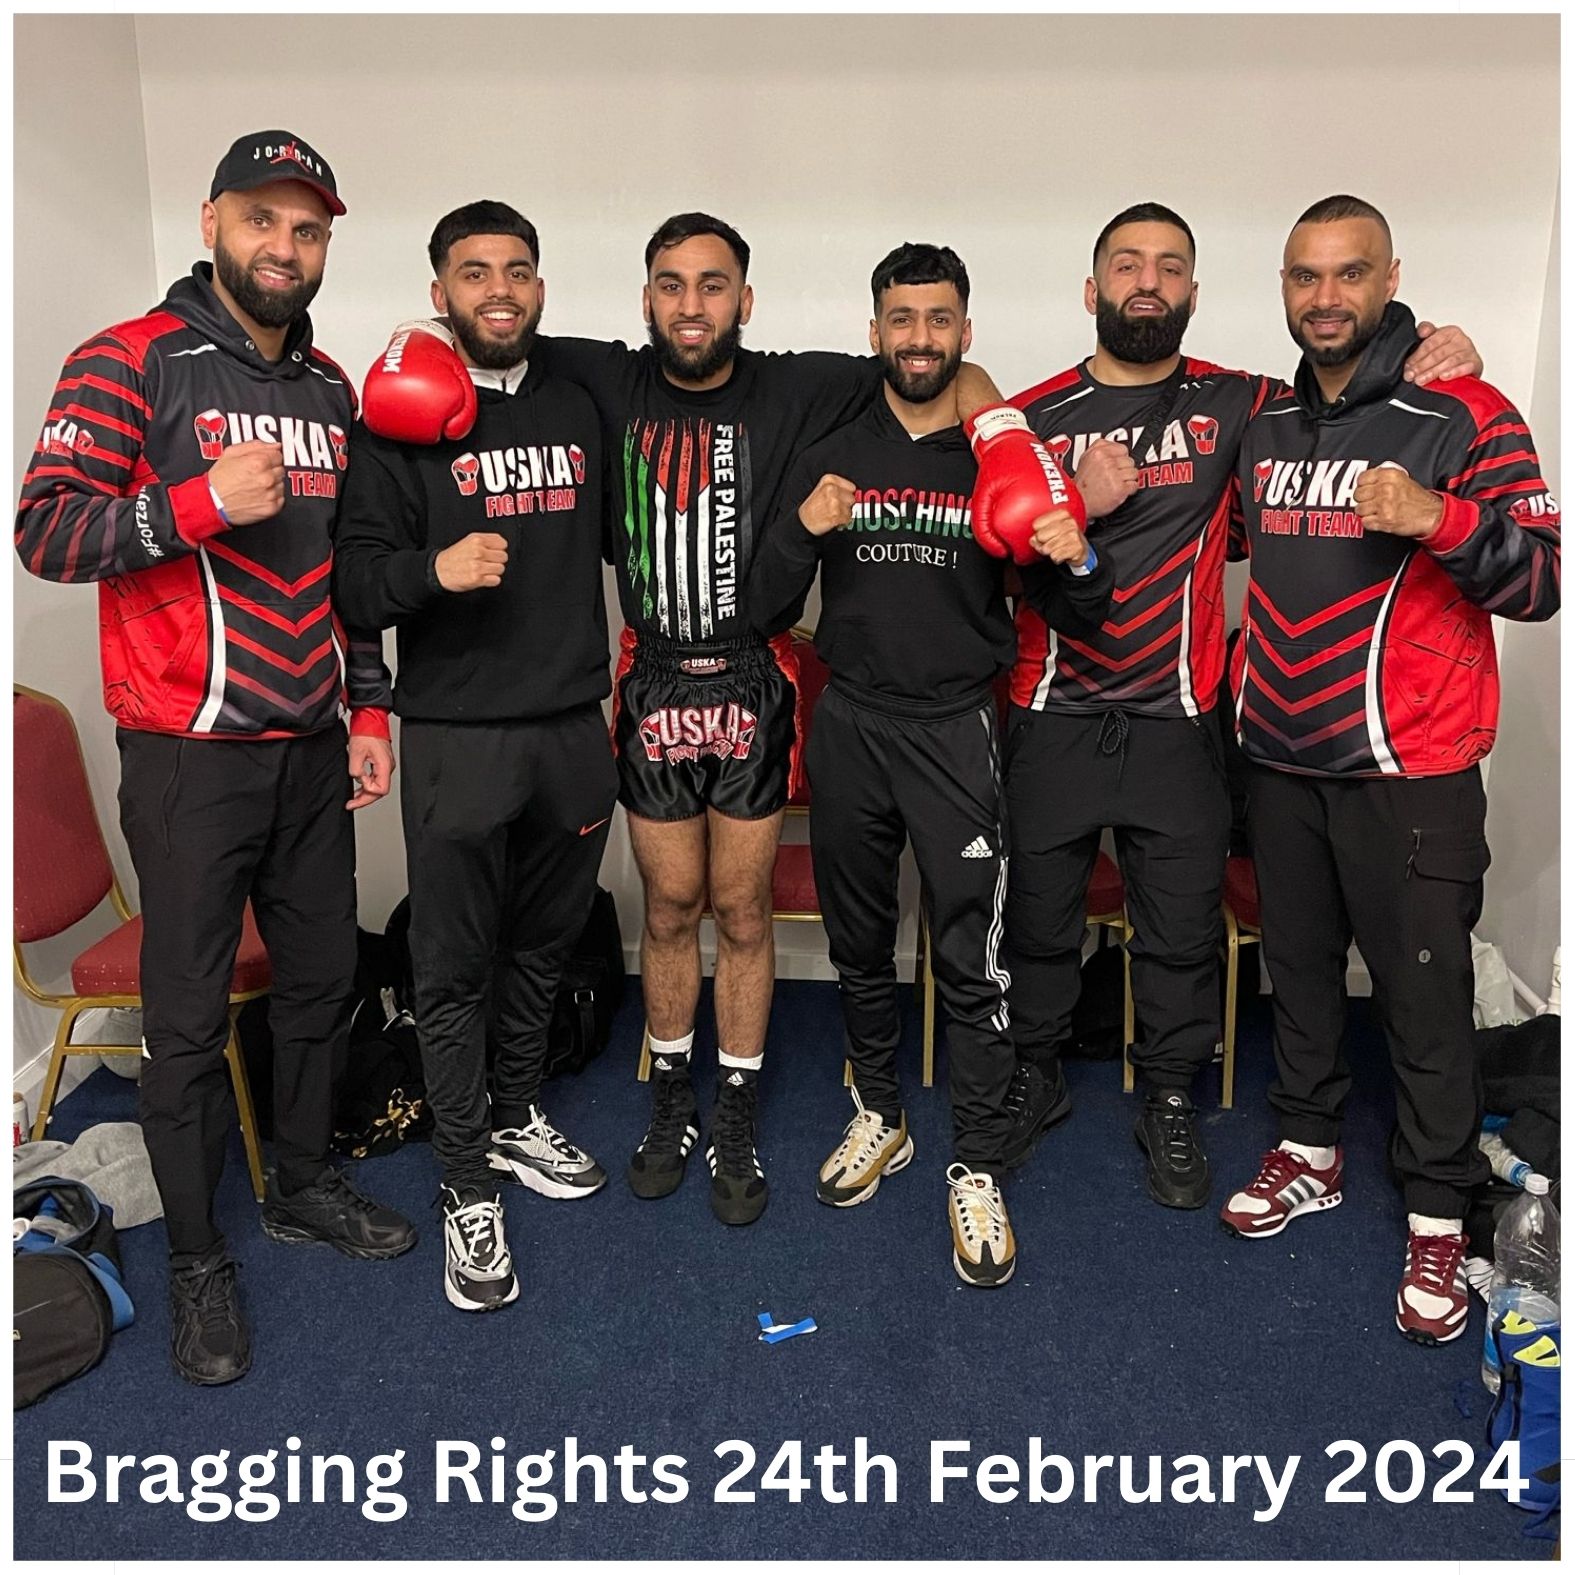 24-02-24 - A mixed bag of results for USKA on Bragging Rights Boxing Event in Coventry!